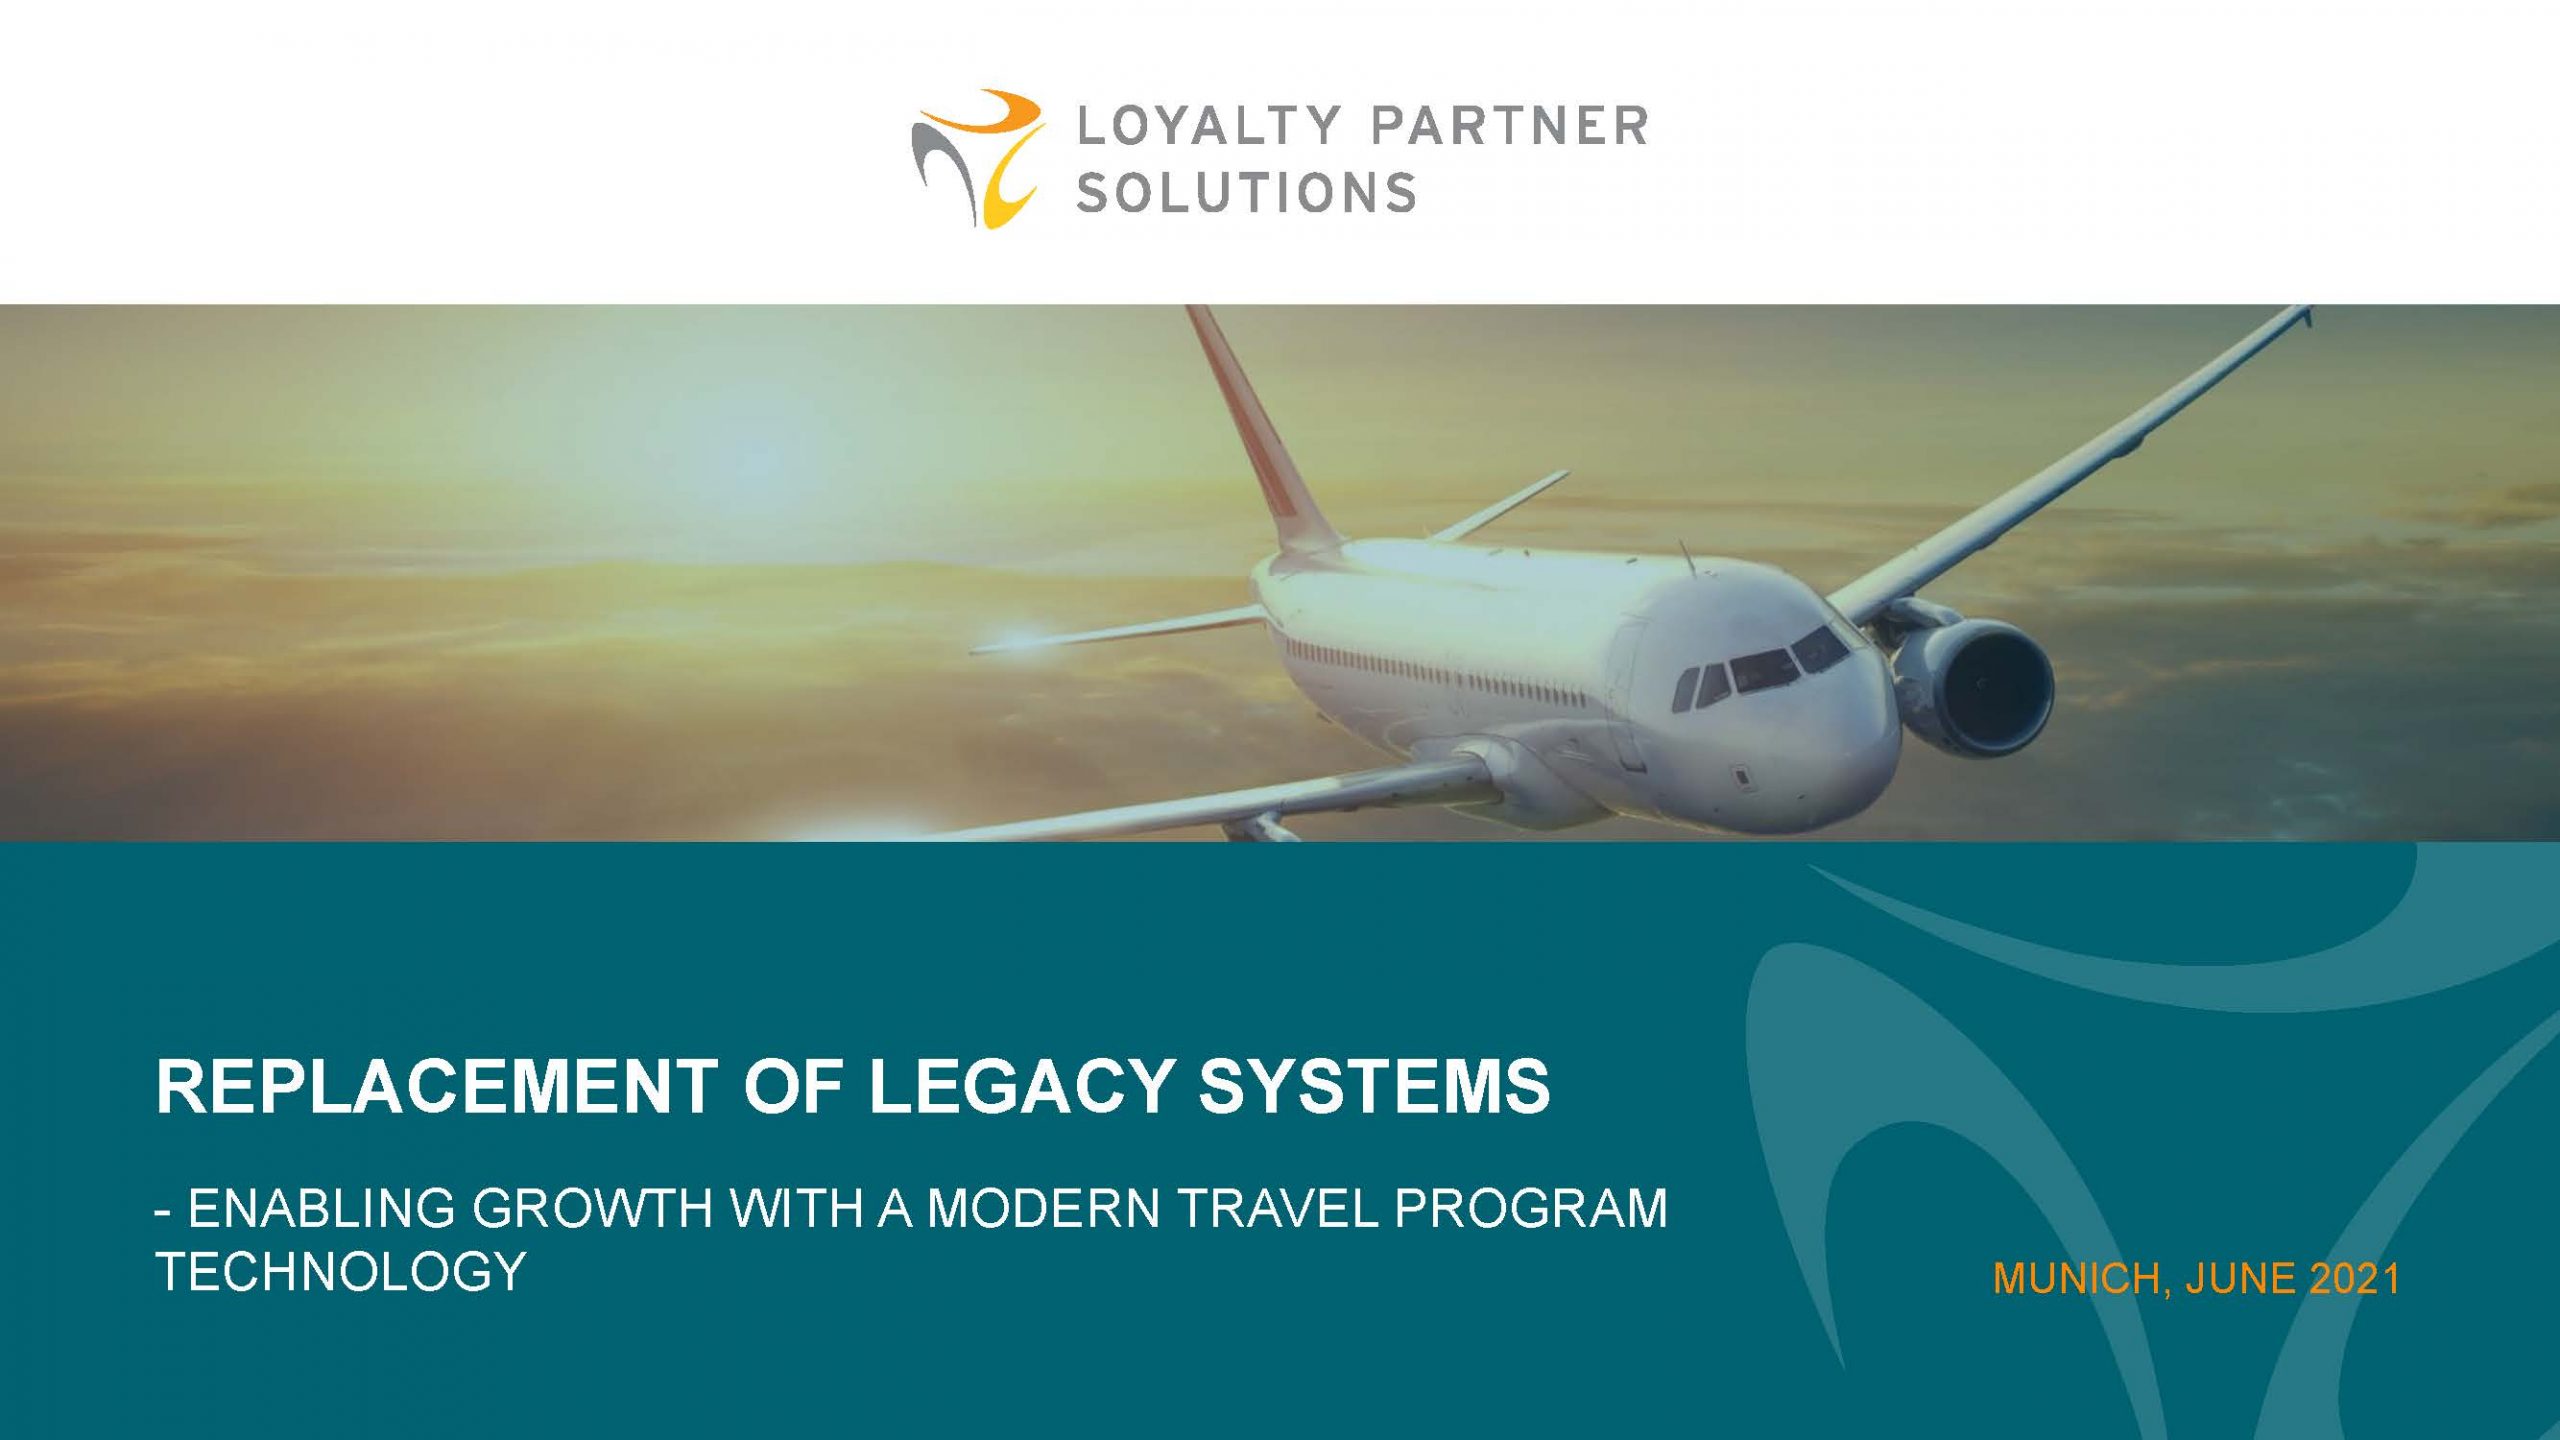 Loyalty Partner Solutions Replacment of Legacy Systems whitepaper preview